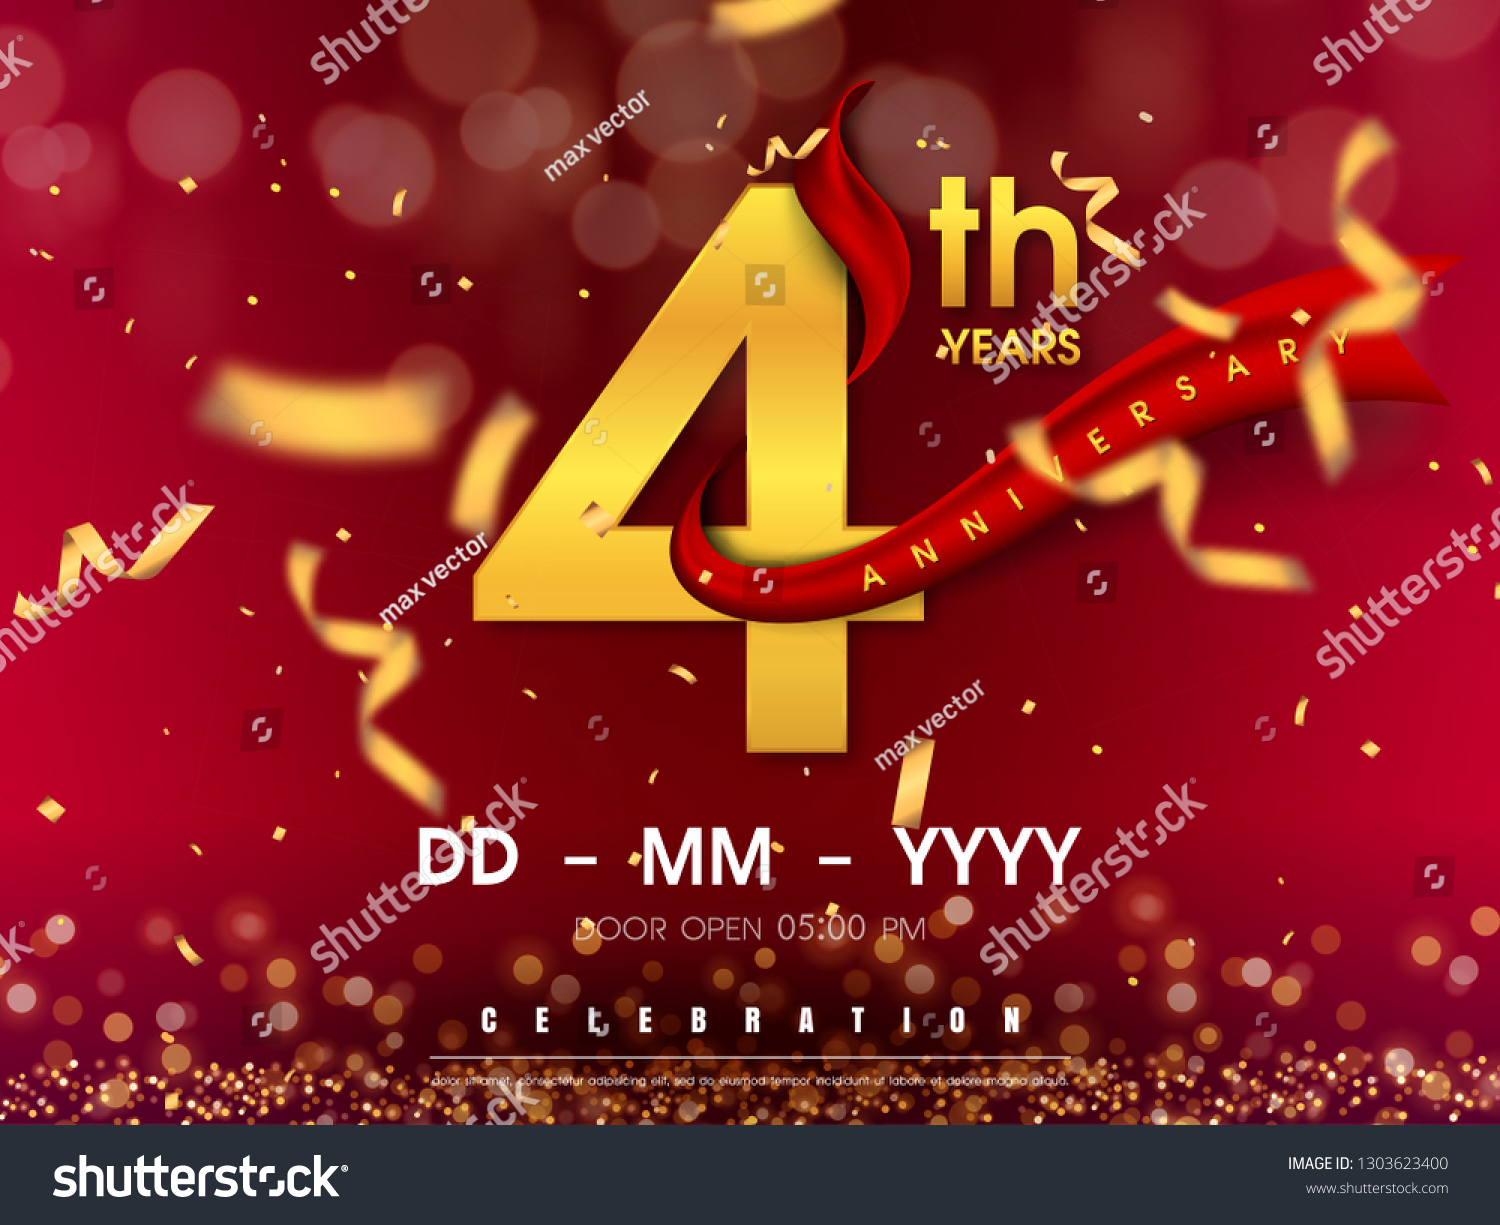 SVG of 4 years anniversary logo template on gold background. 4th celebrating golden numbers with red ribbon vector and confetti isolated design elements svg